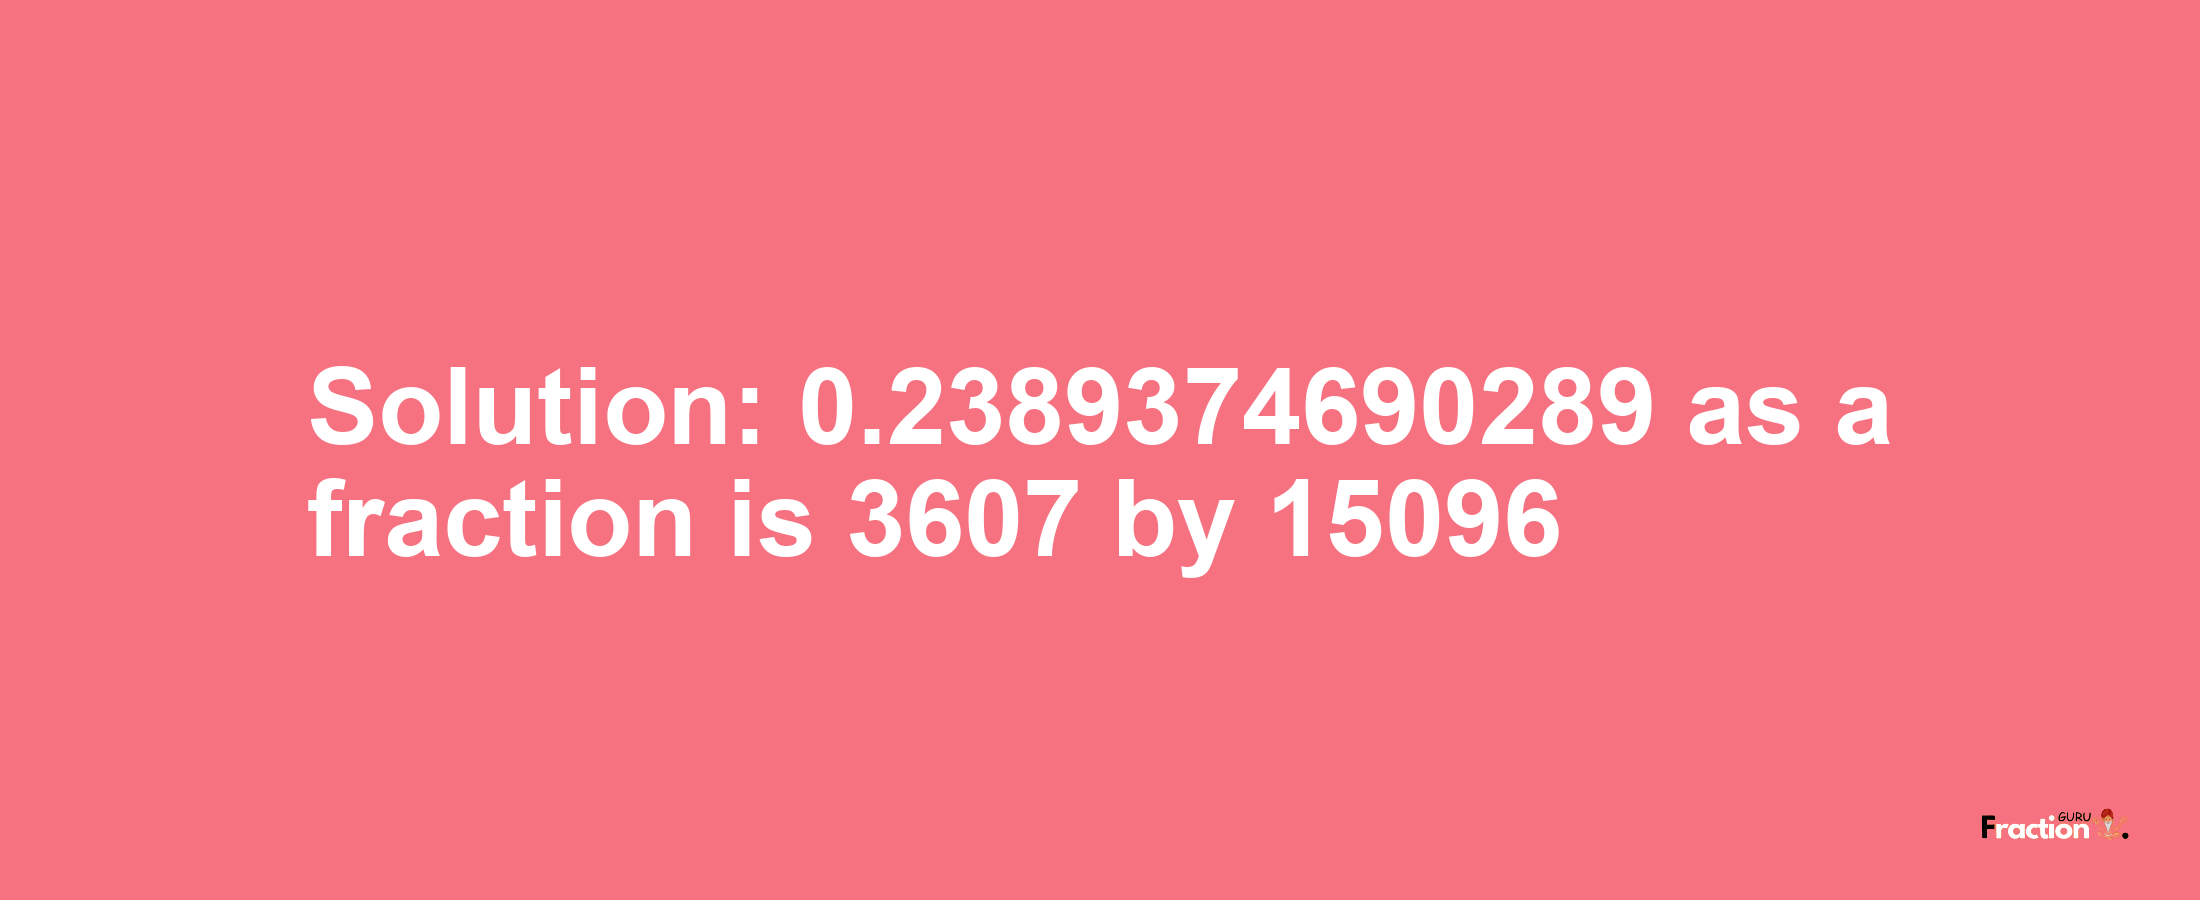 Solution:0.2389374690289 as a fraction is 3607/15096